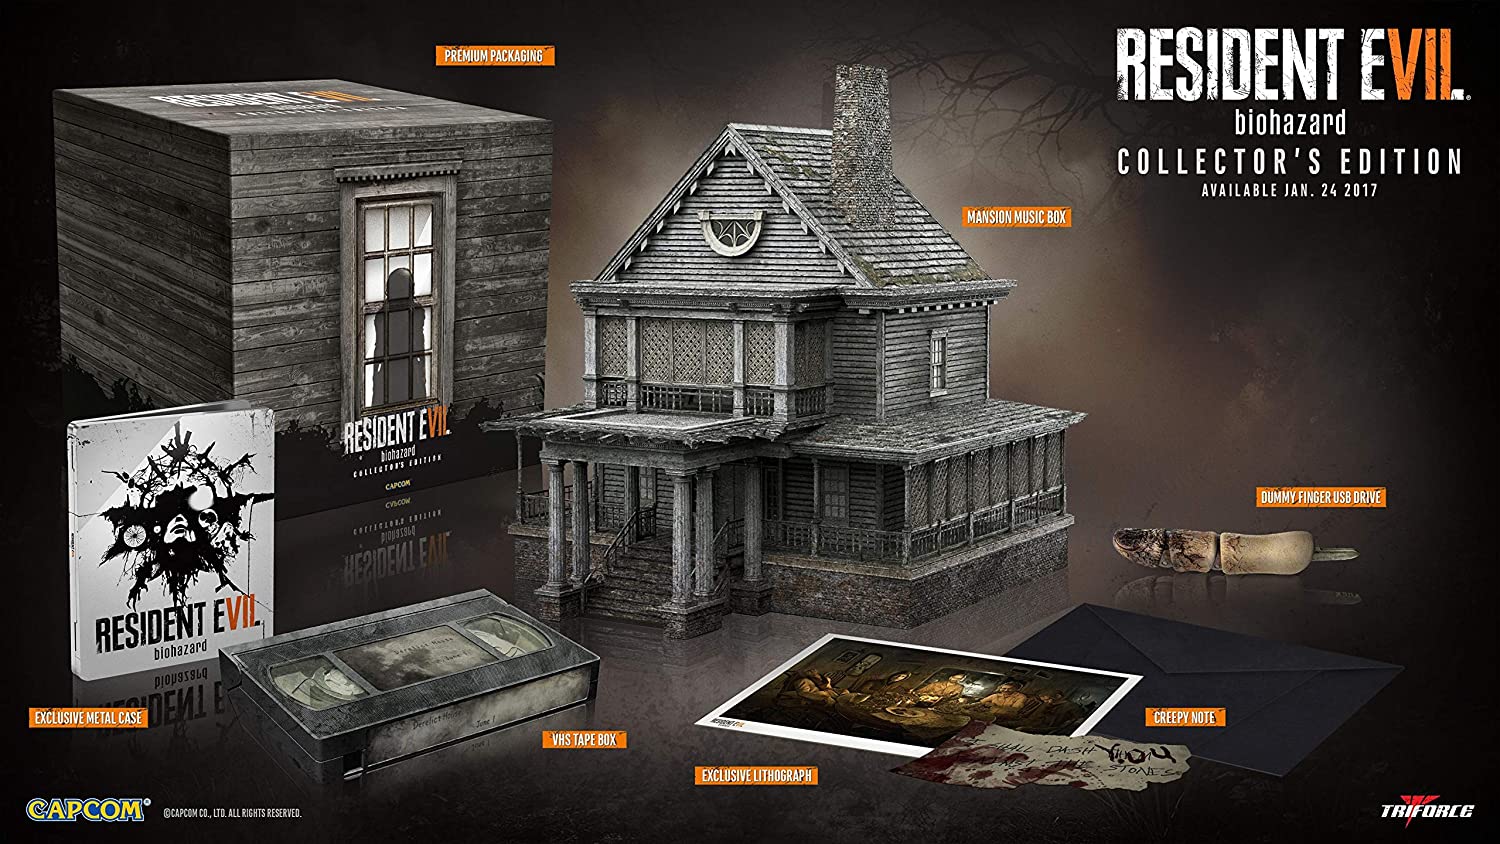 Resident Evil VII: Biohazard Collector's Edition (Playstation 4) – J2Games